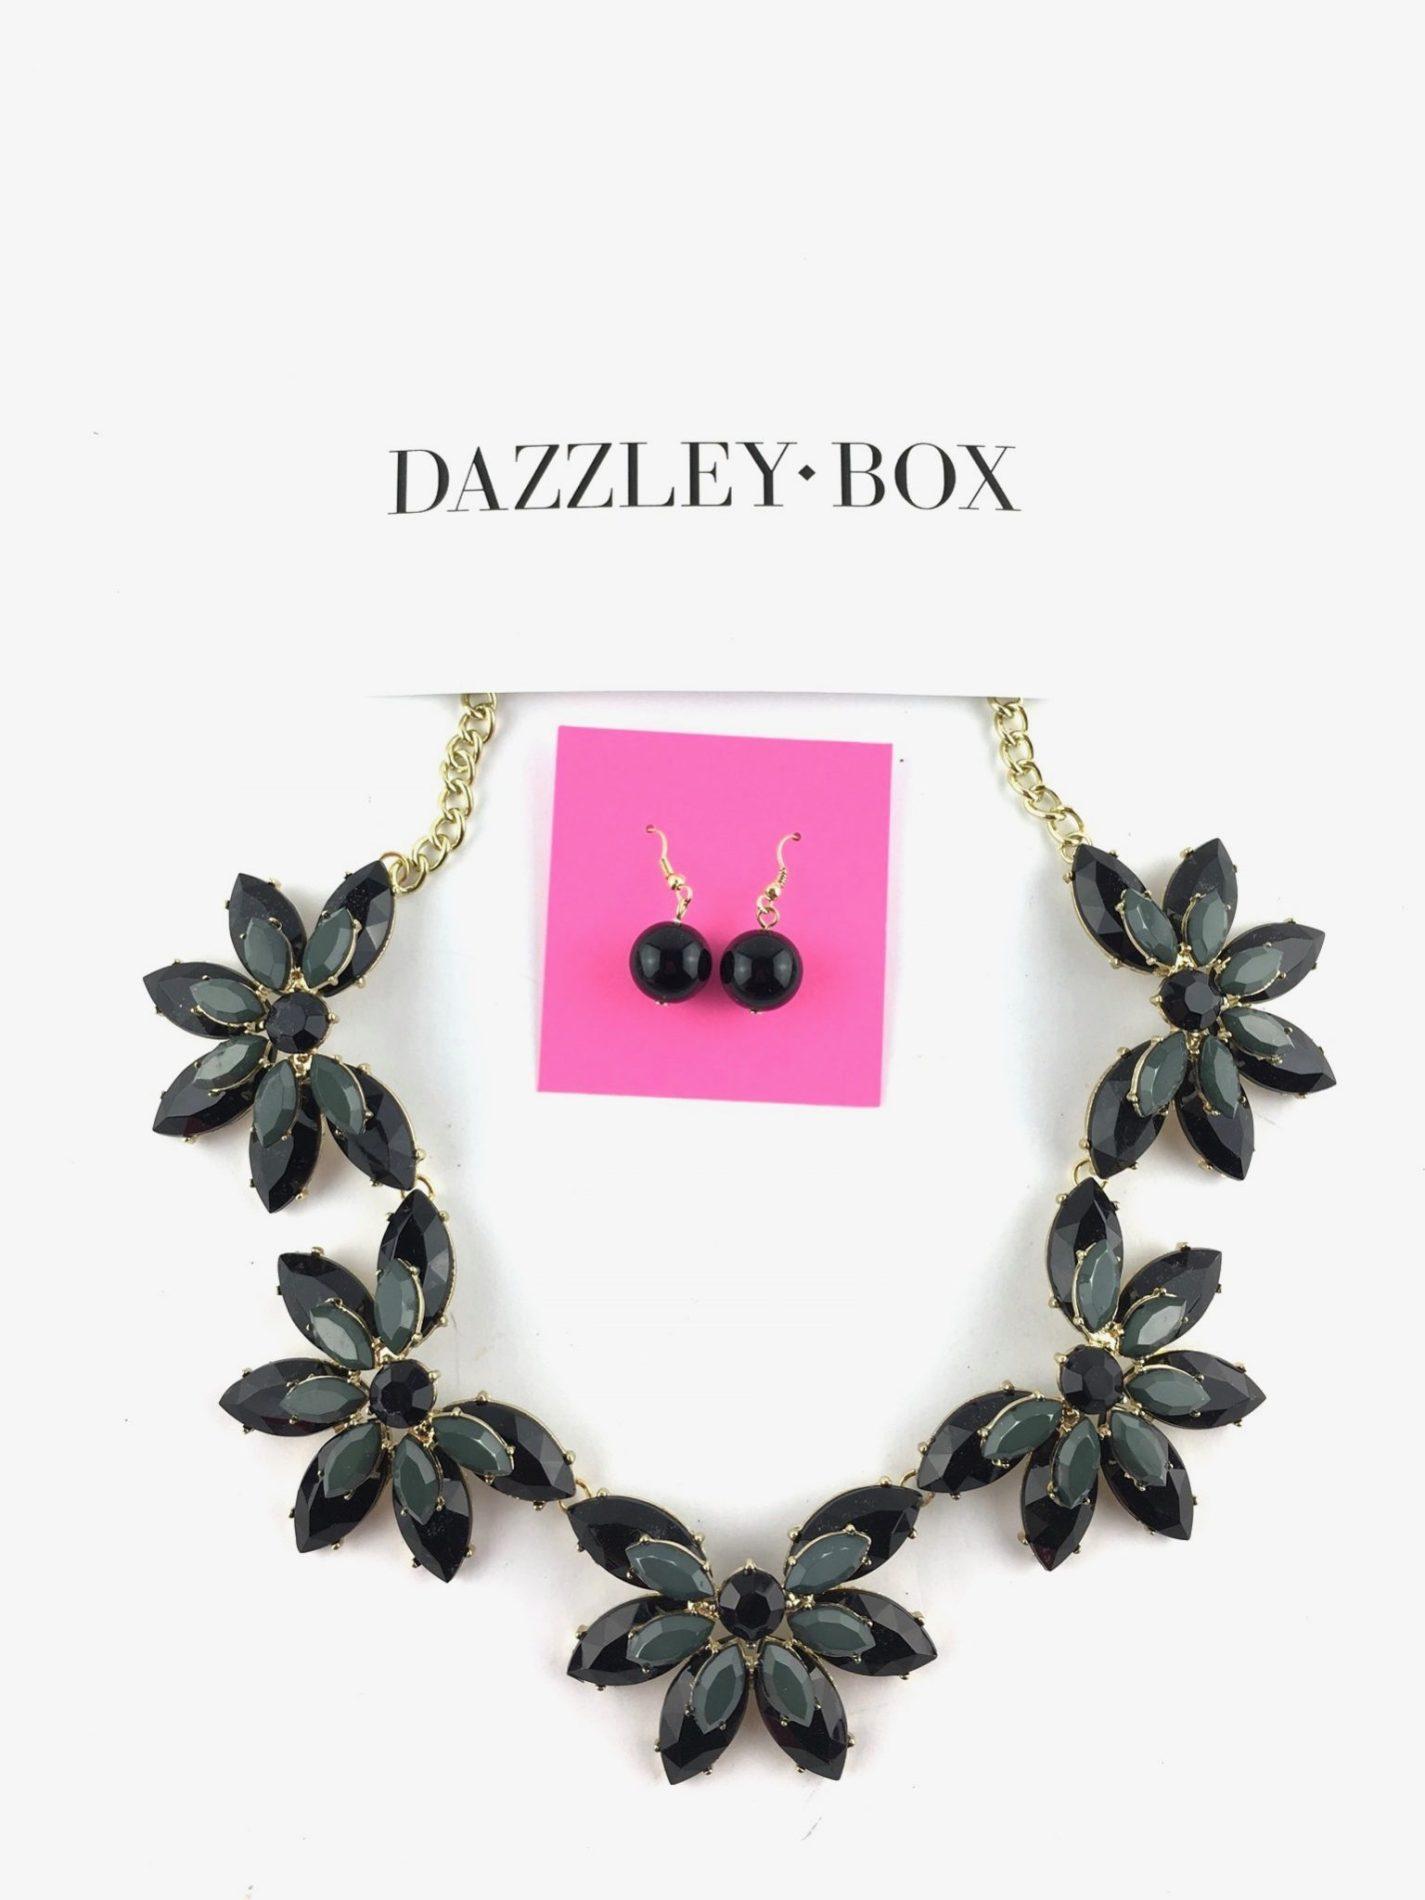 Dazzley Box Review – December 2017